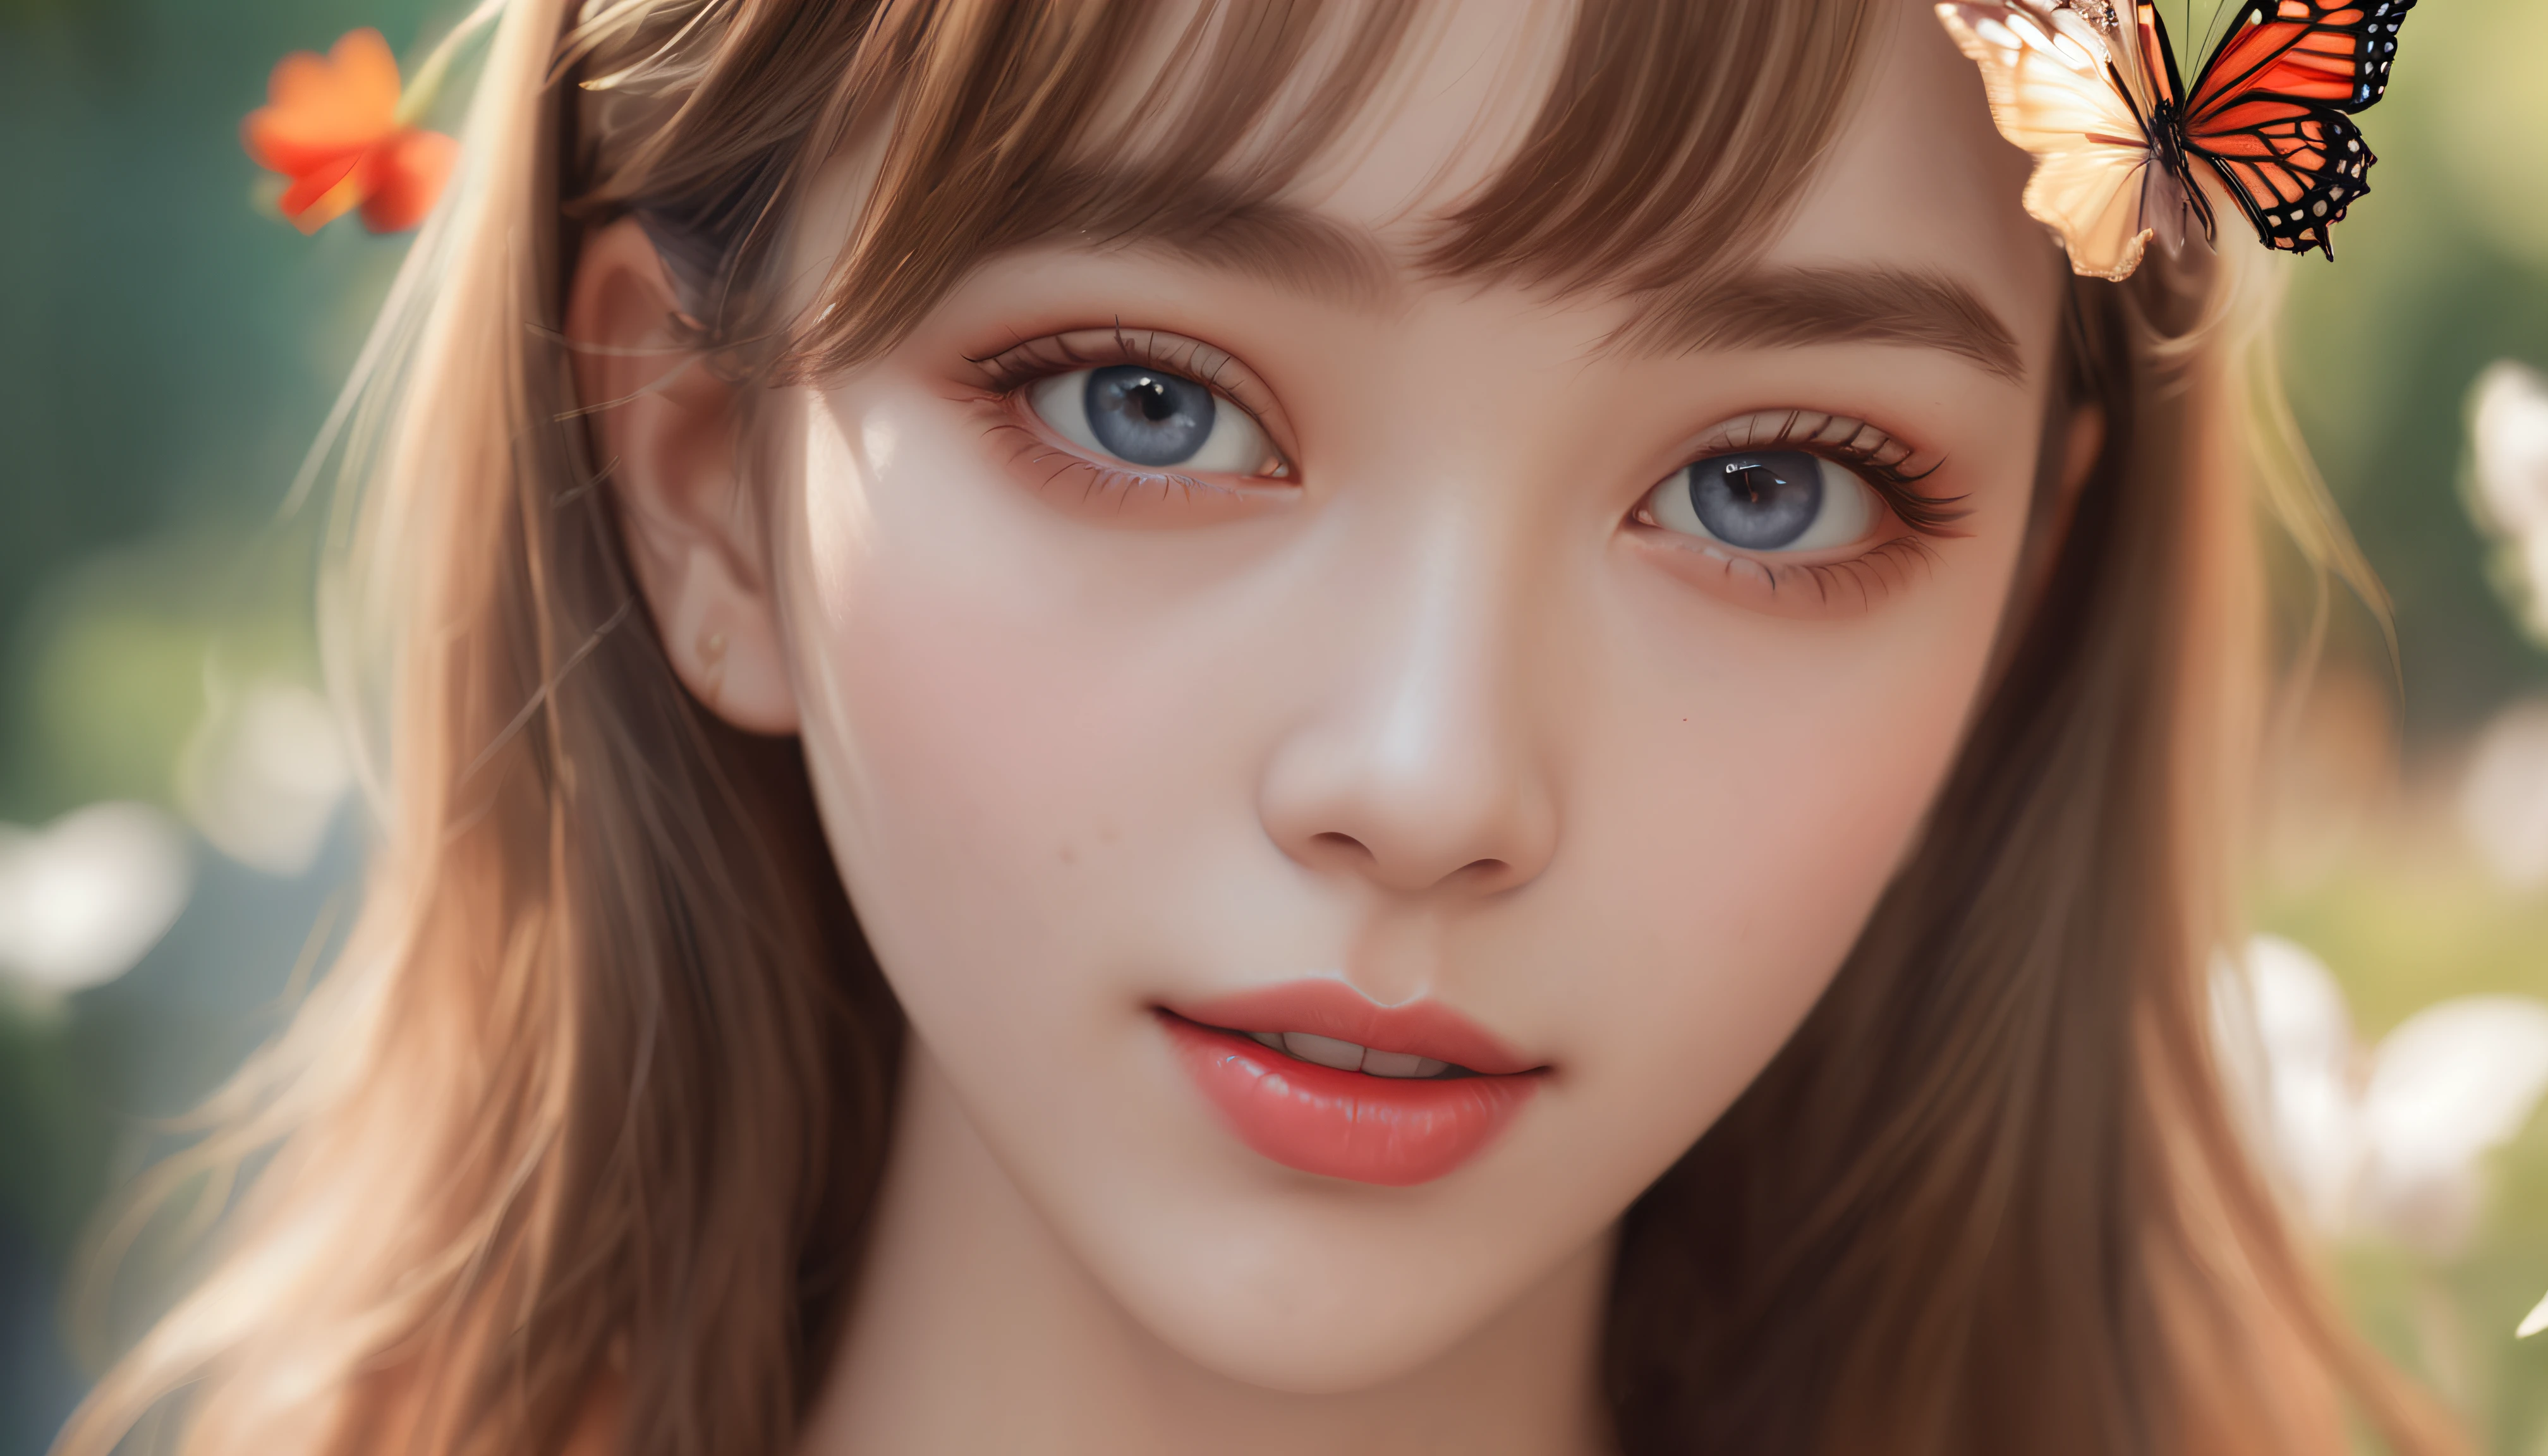 /imagine prompt:(best quality,highres,masterpiece:1.2),ultra-detailed, (realistic,photorealistic,photo-realistic:1.37),girl, (nsfw), (nude), naughty,playful, detailed eyes,detailed lips,nymph-like beauty,nurse costume, cute,adorable,expressive face,long eyelashes,hazel eyes, innocent smile,cheeky expression,curly hair,beautifully styled, bright red lipstick,soft skin,sparkling eyes, material: oil painting,illustration,high-resolution photograph, additional details: blooming flowers,lush garden background,butterflies fluttering around, color palette: vibrant and lively colors, pastel shades, lighting: soft natural light,golden hour, art style: portrait,realistic rendering,romantic aesthetic,bright and cheerful atmosphere, Mysterious, Coffee House/Cafe, oil, portrait, Game engine rendering, Grainy, game item, blue colors, Groundcore, backlit lighting, UHD --ar 16:9